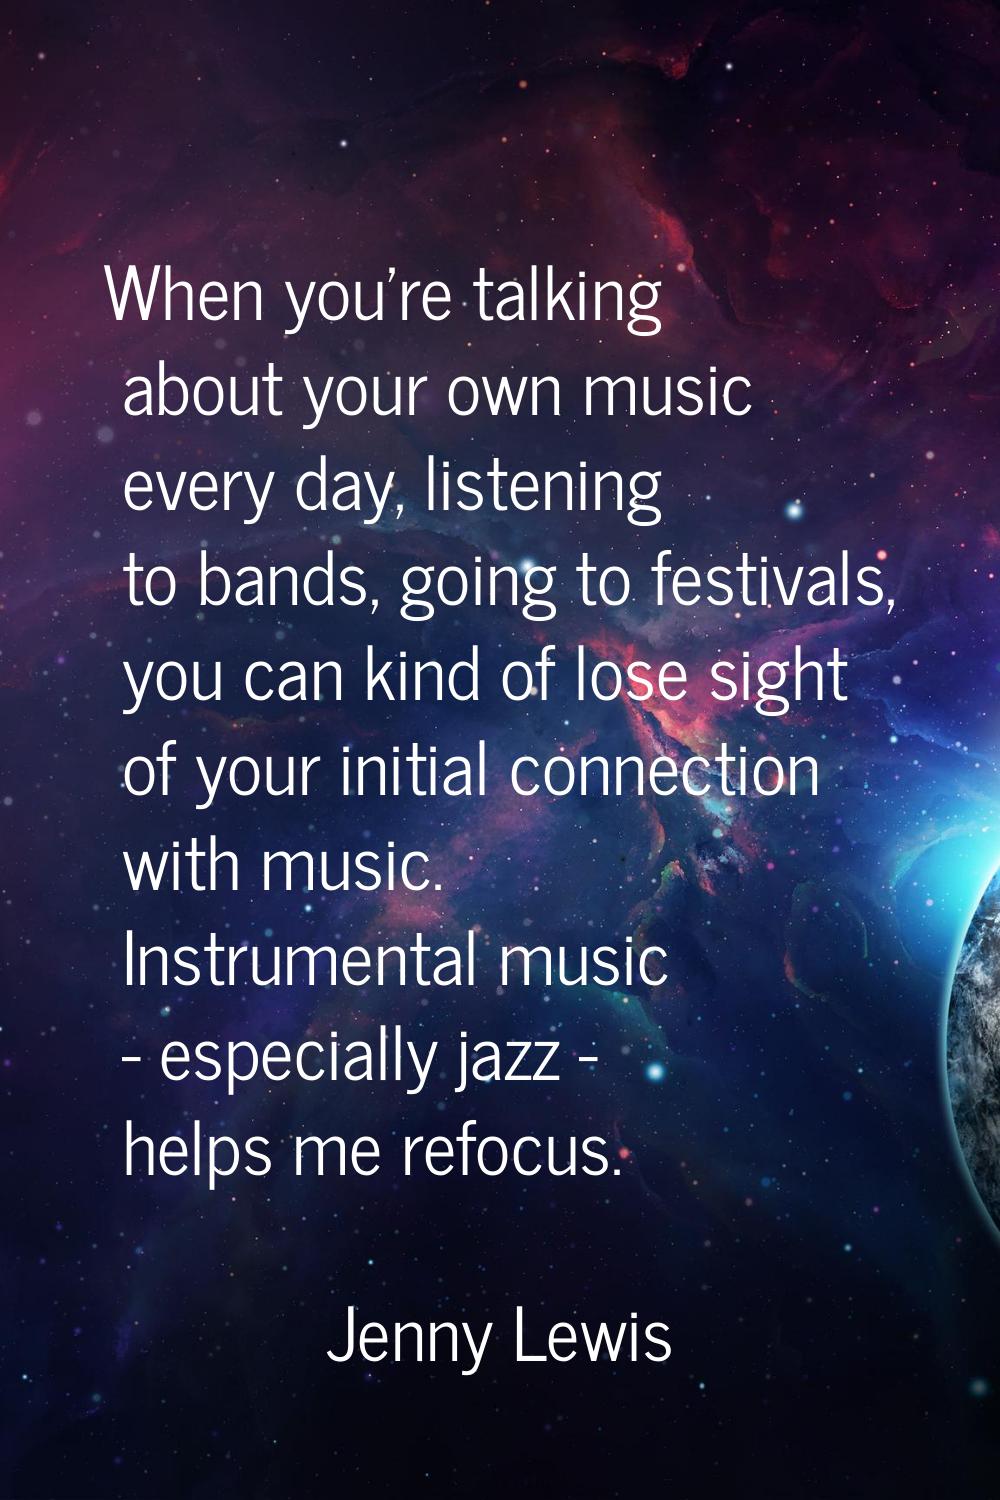 When you're talking about your own music every day, listening to bands, going to festivals, you can